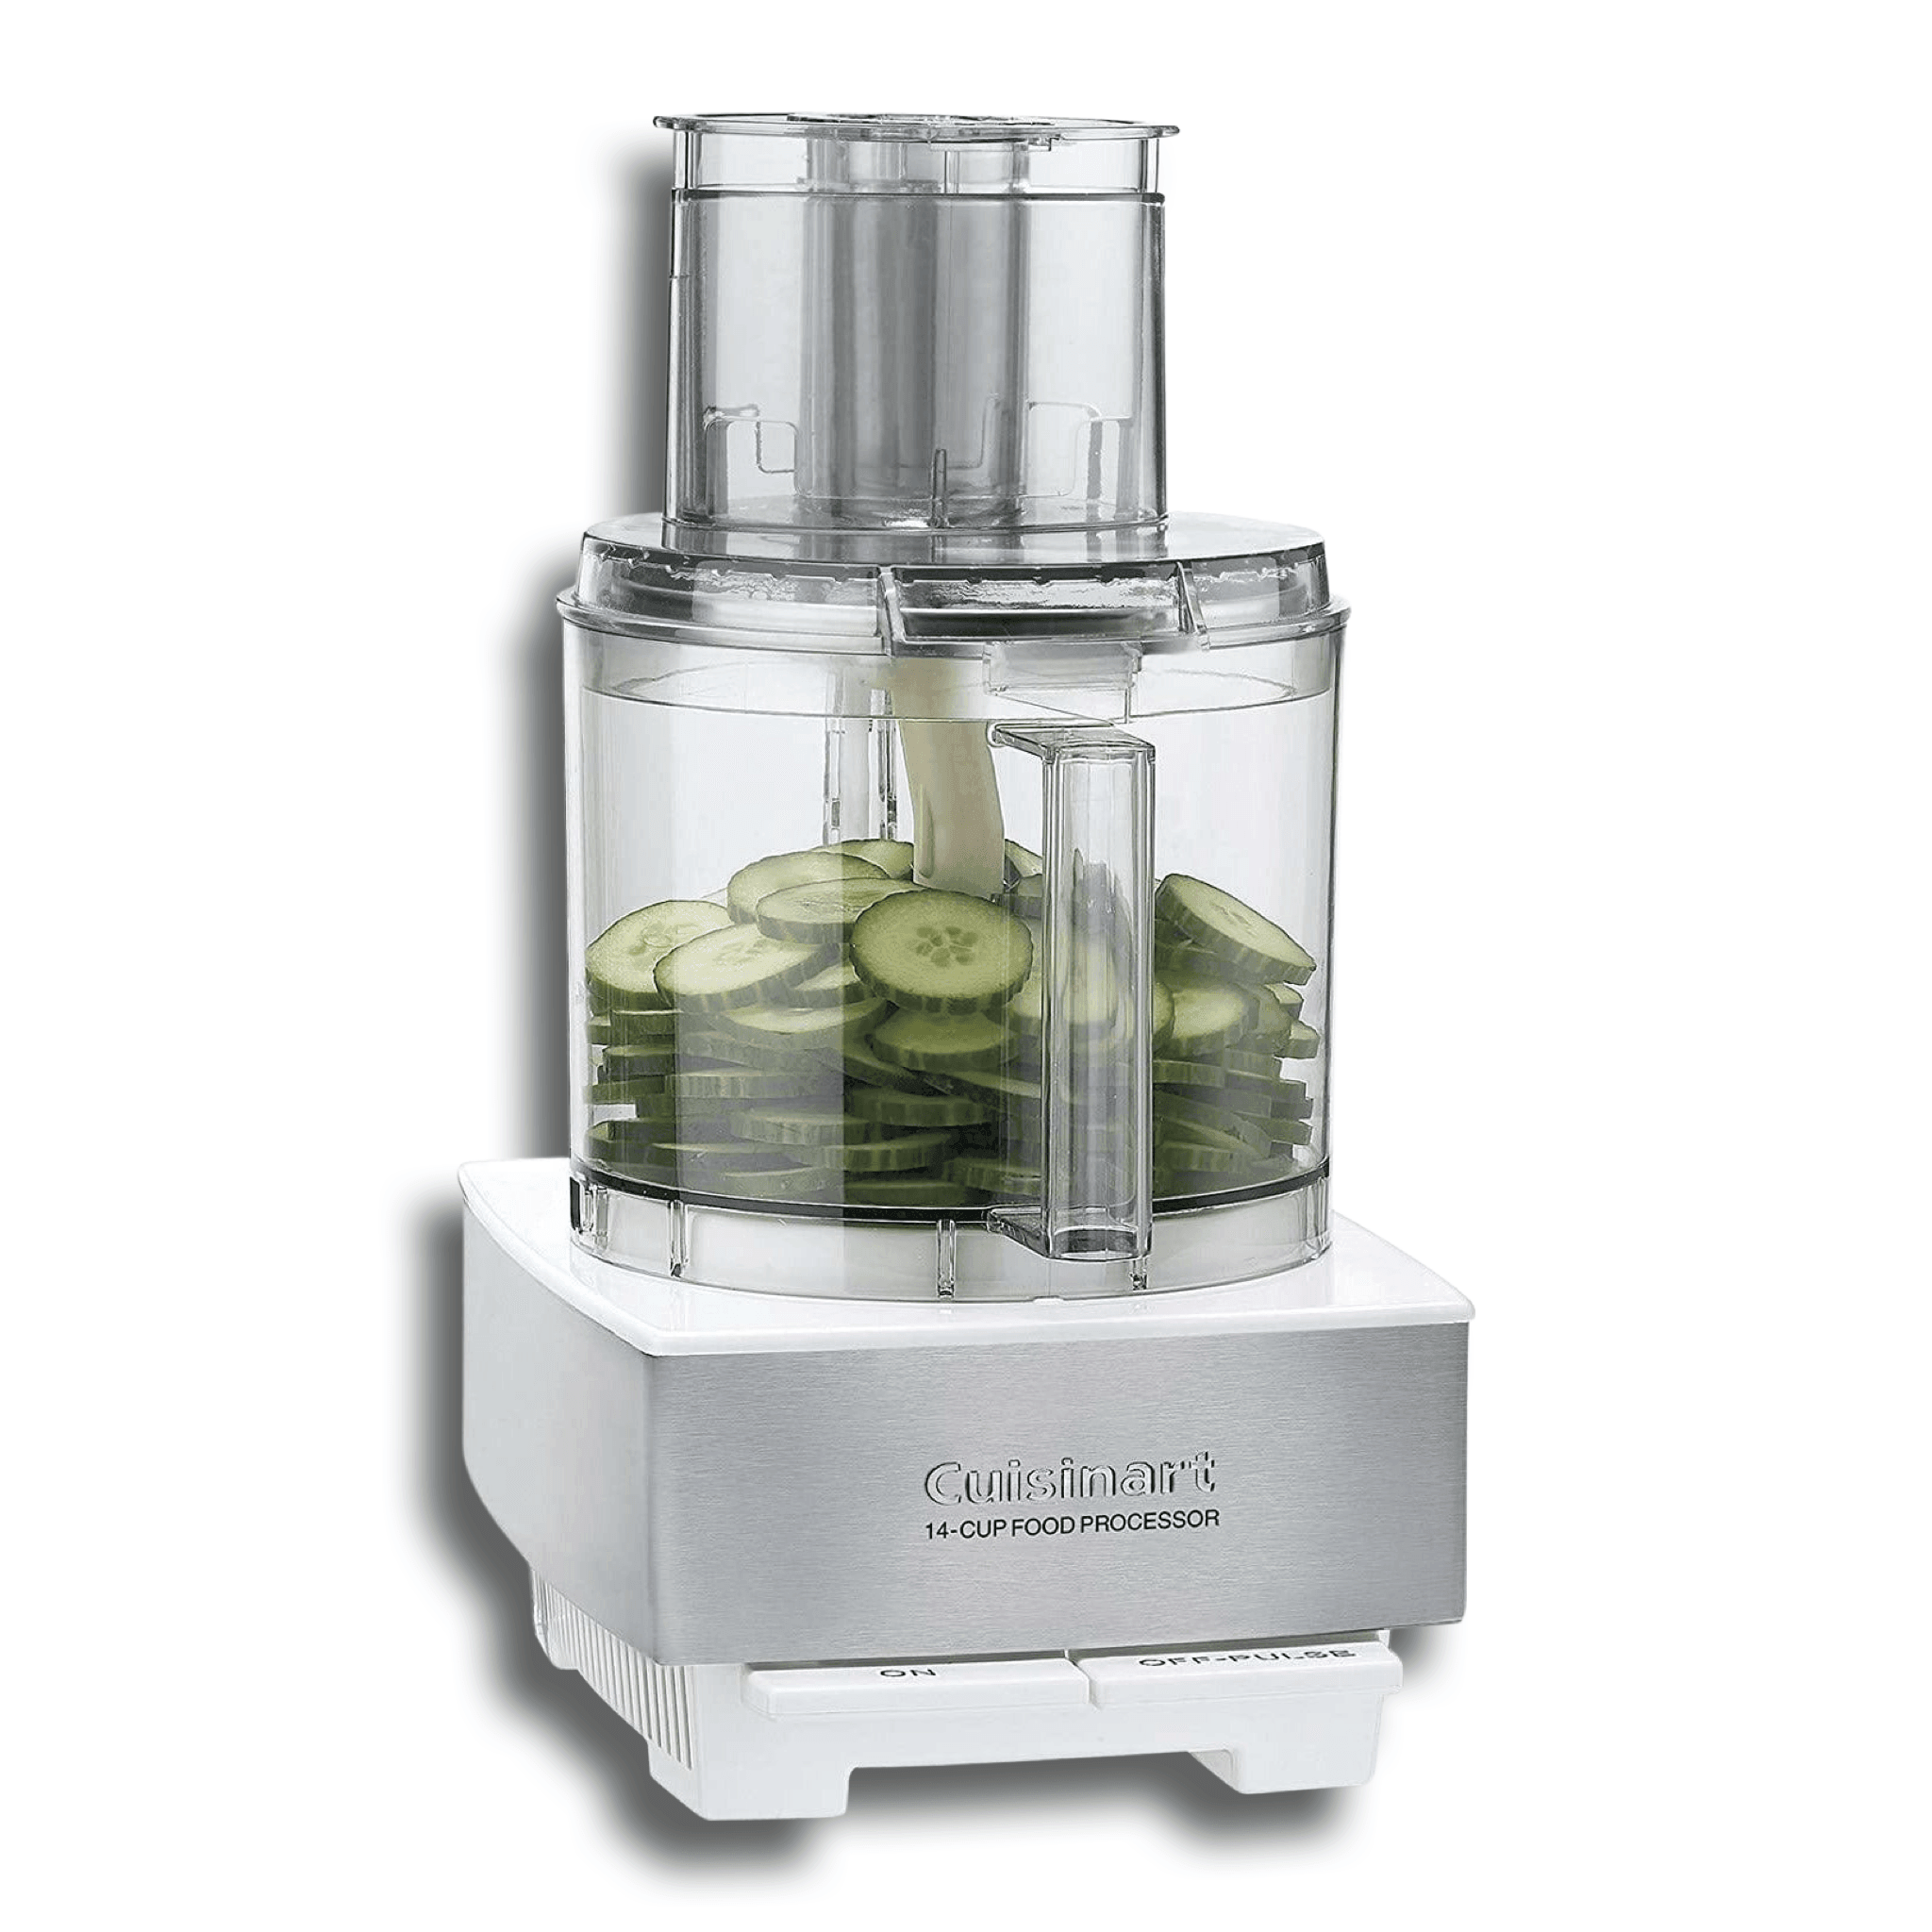 Cuisinart Food Processor, 14 Cup, Stainless Steel, White